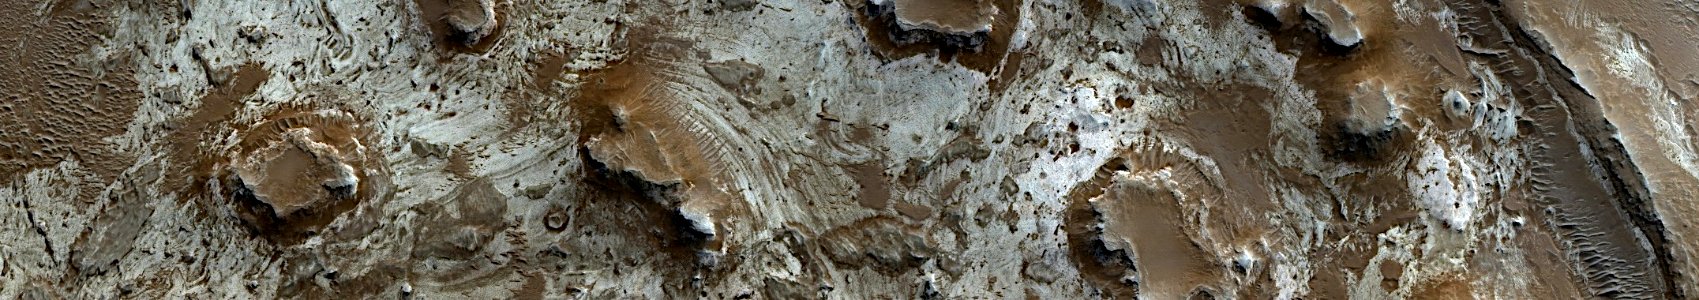 Mars - Layering in Exhumed Crater at Meridiani Planum photo